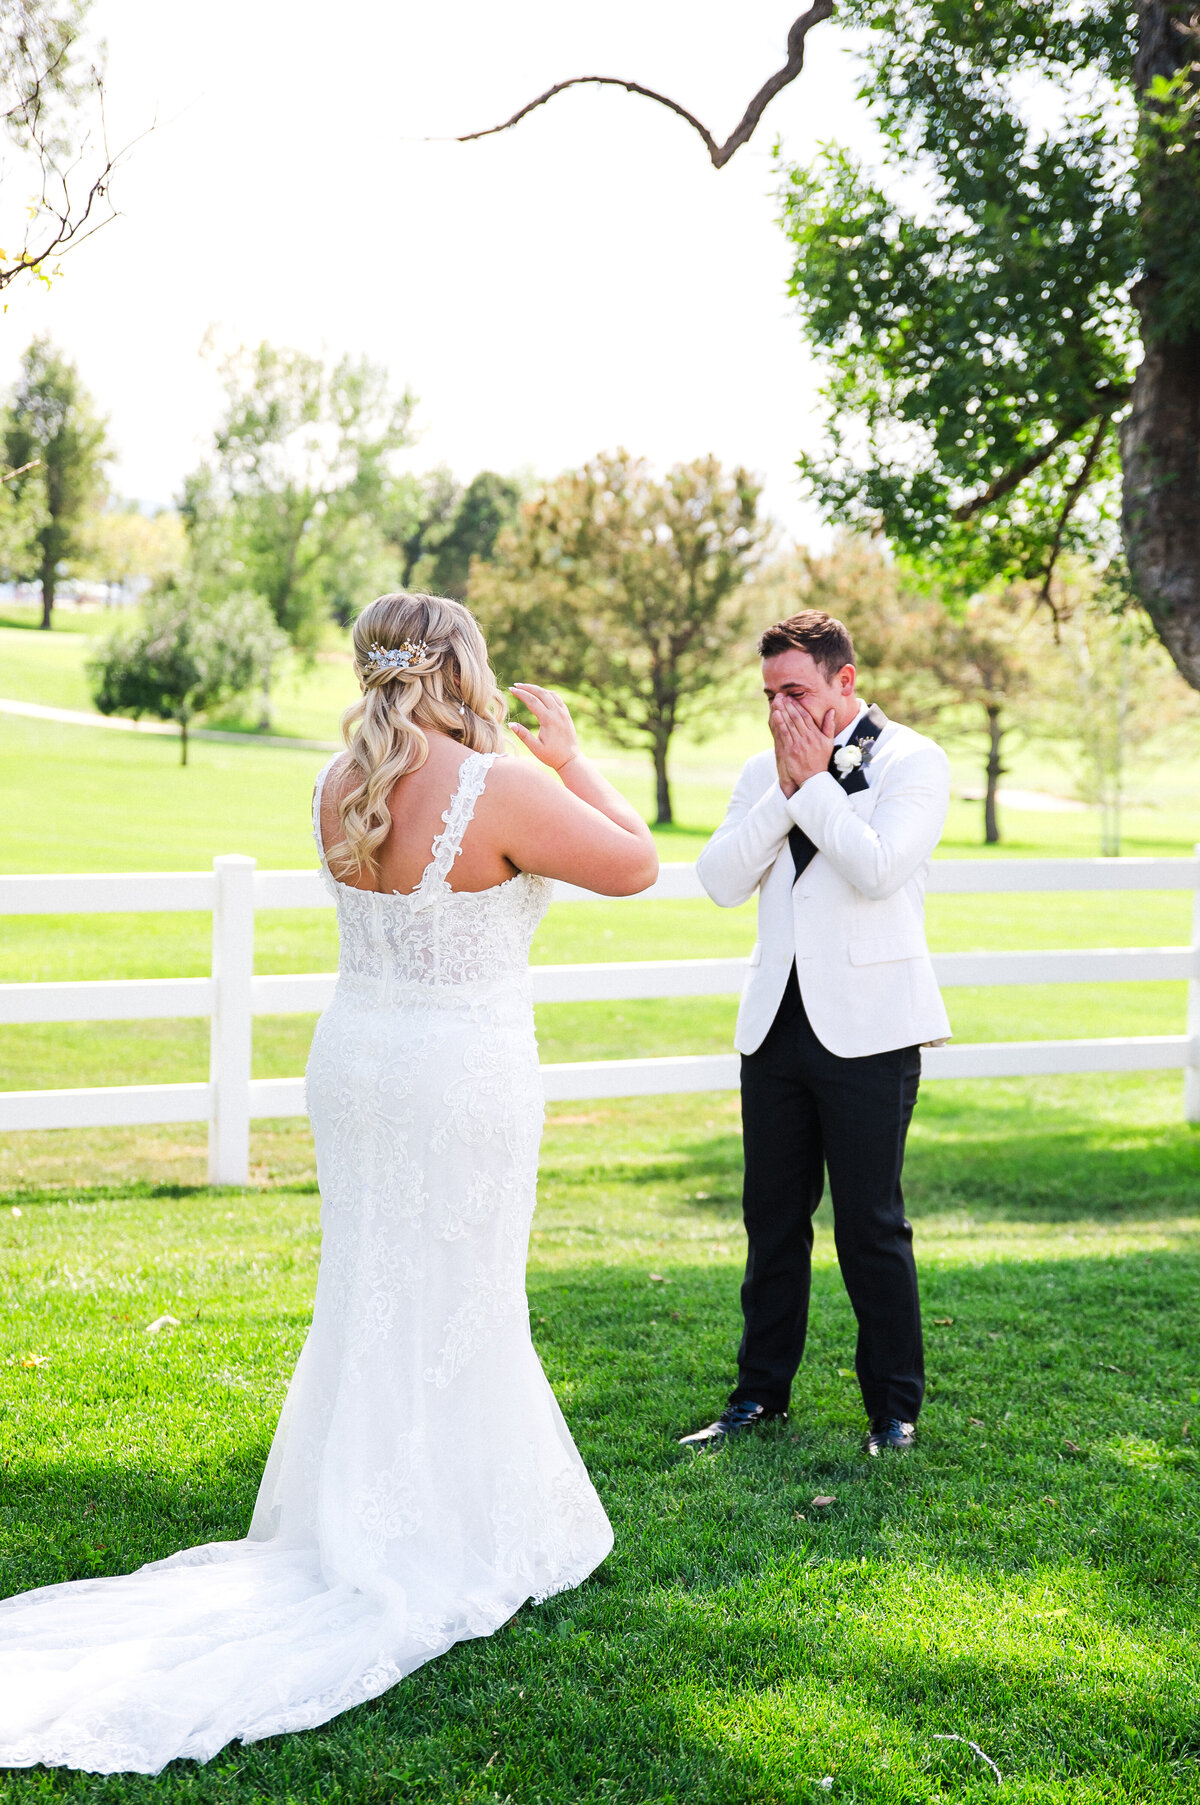 A groom covers his mouth in amazement as he sees his bride for the first time at The Barn at Raccoon Creek in Denver, Colorado.